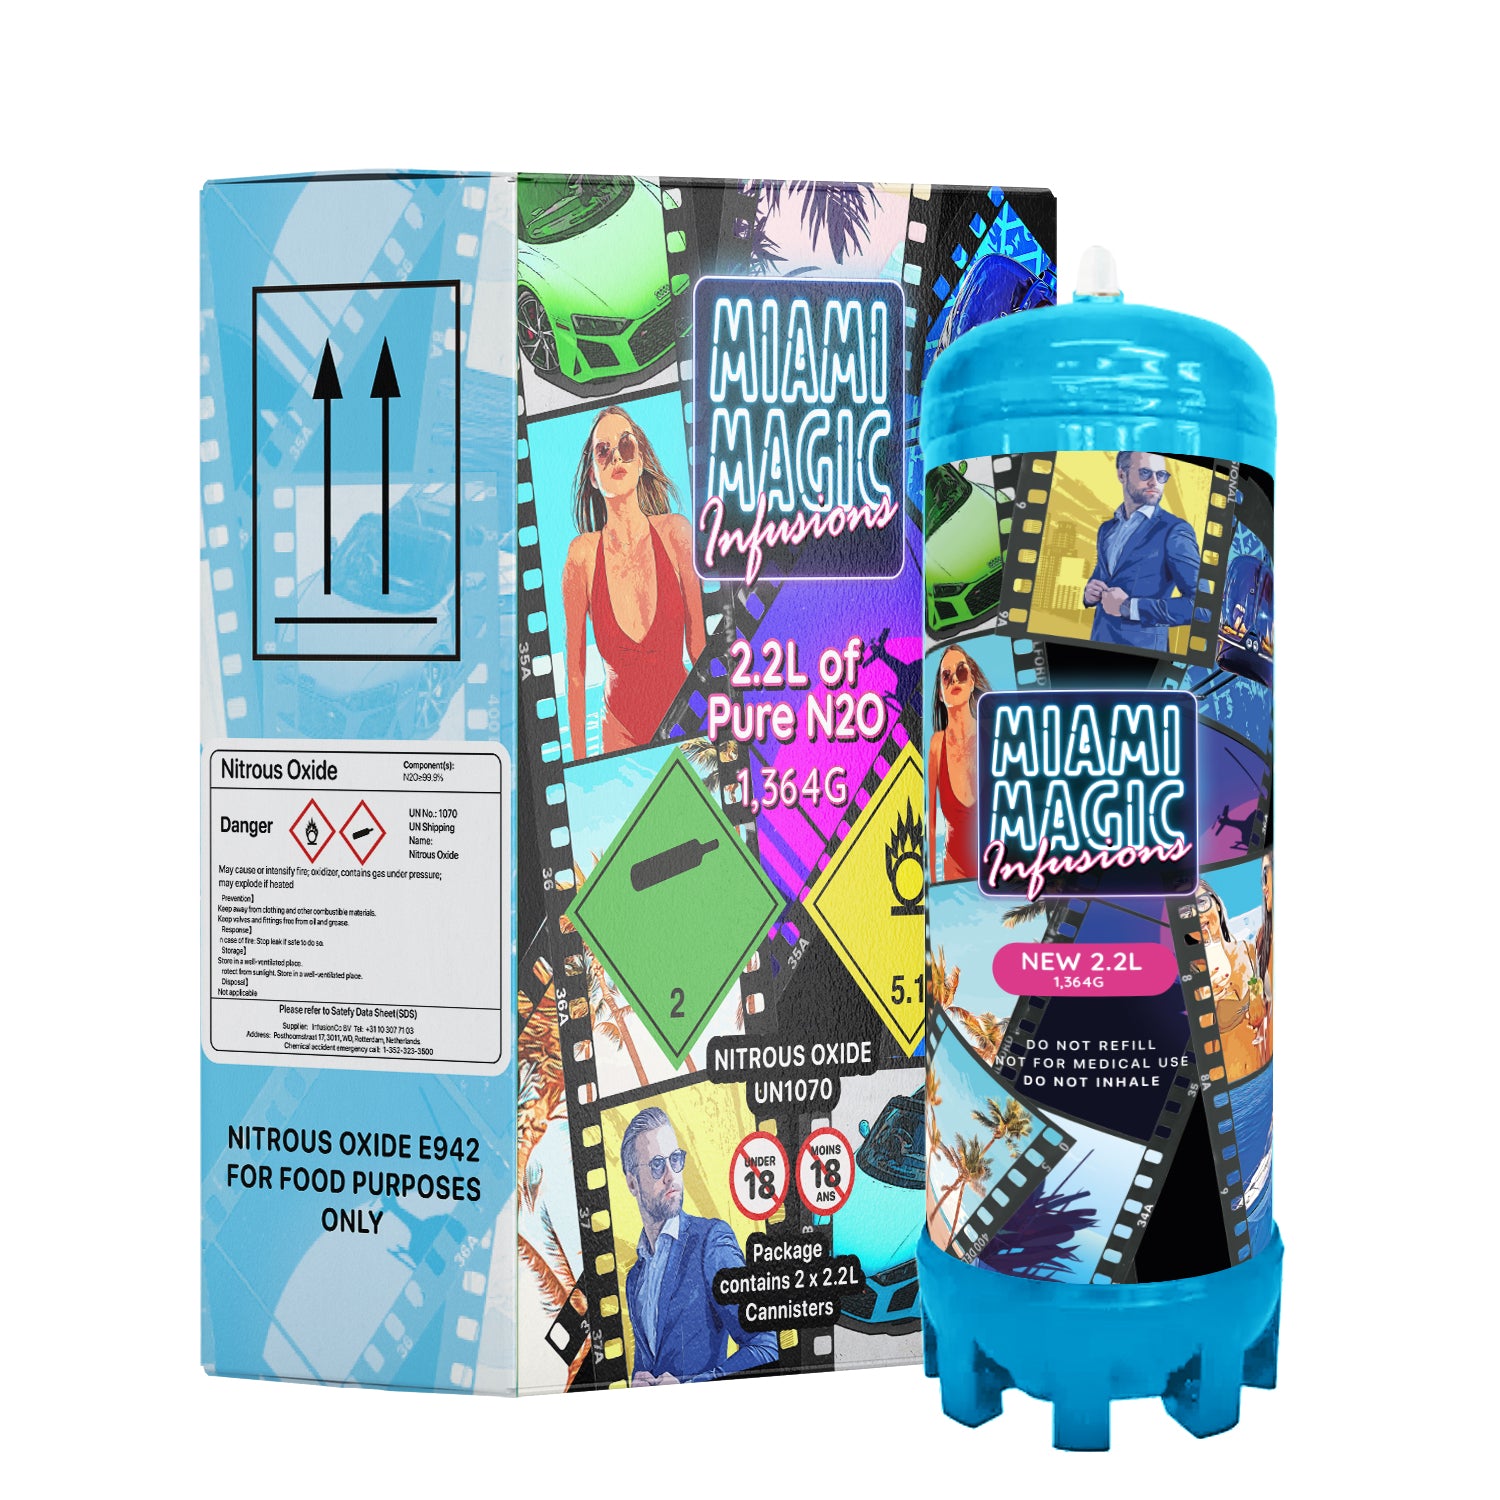 Miami Magic Infusions 2.2L N2O Cannister